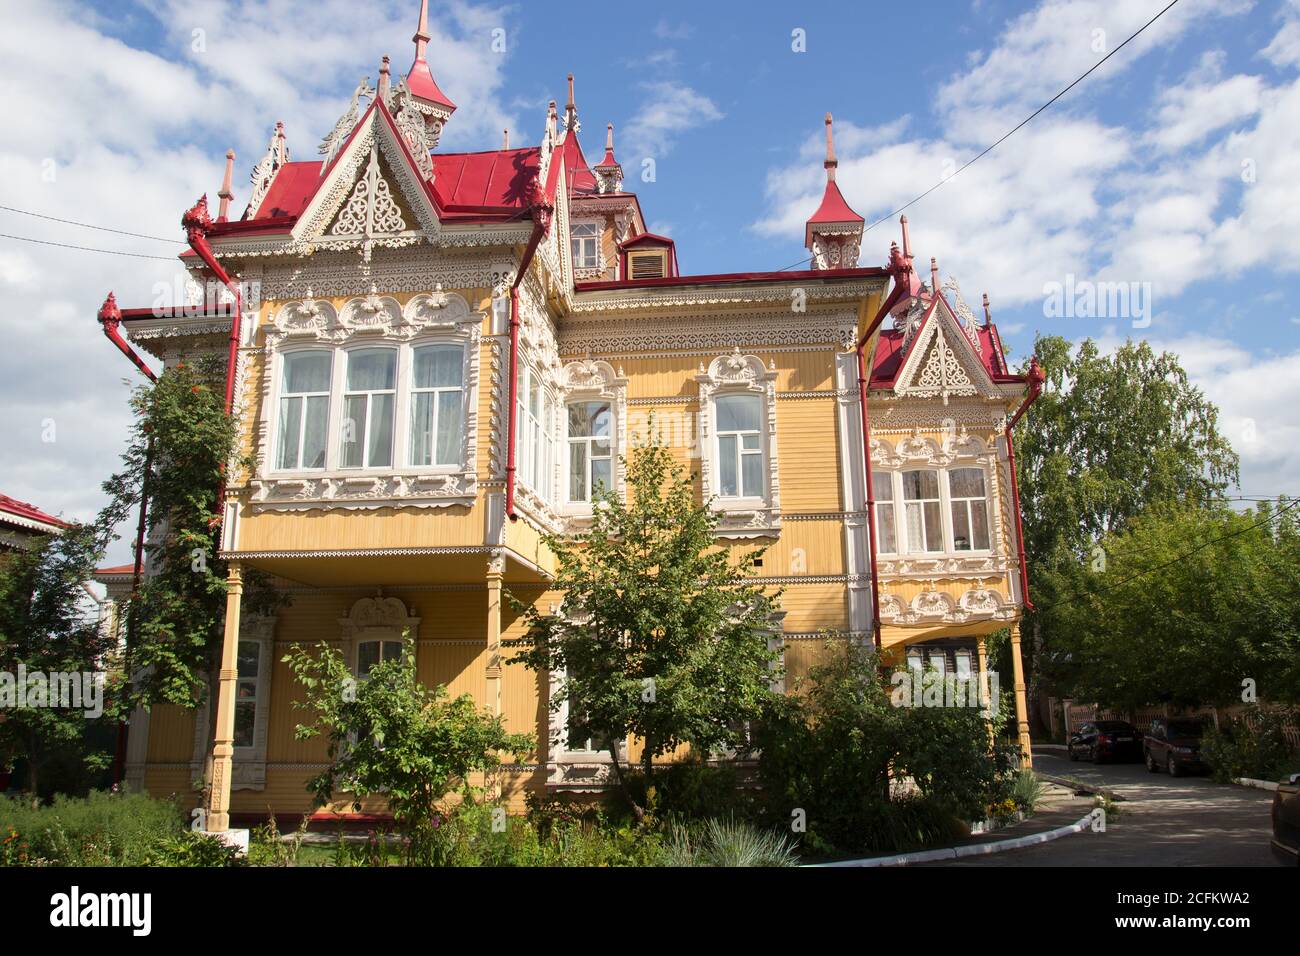 Russian style in architecture. House with firebirds, Wooden house, Tomsk, Russia. Beautiful carved elements of Russian Northern architecture Stock Photo